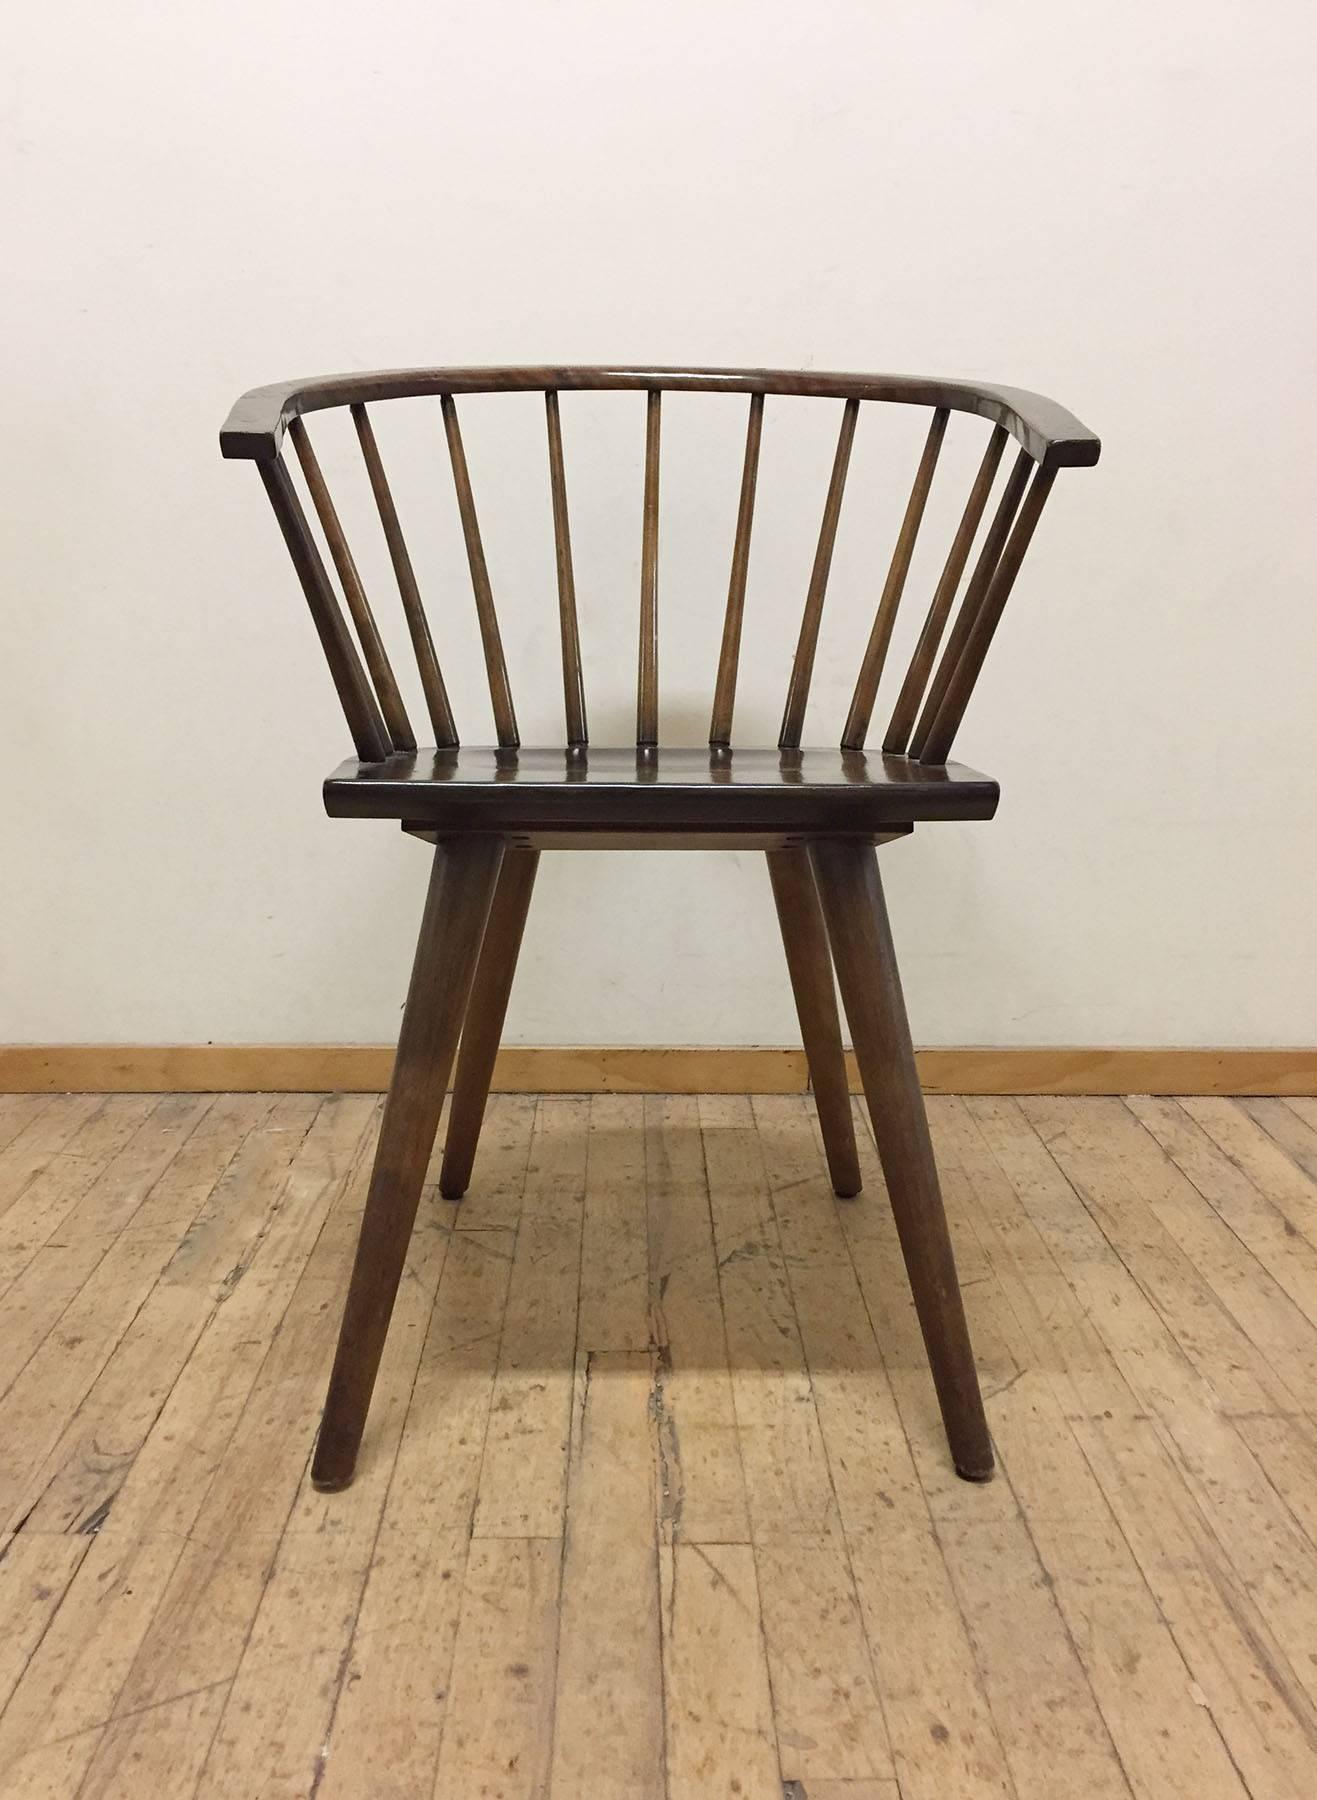 A good matched set of four American Windsor inspired chairs by Russel Wright for Conant Ball company. Signed to underside. Manner of Paul McCobb and George Nakashima. Wrights own take on it brings an adorable rounded 